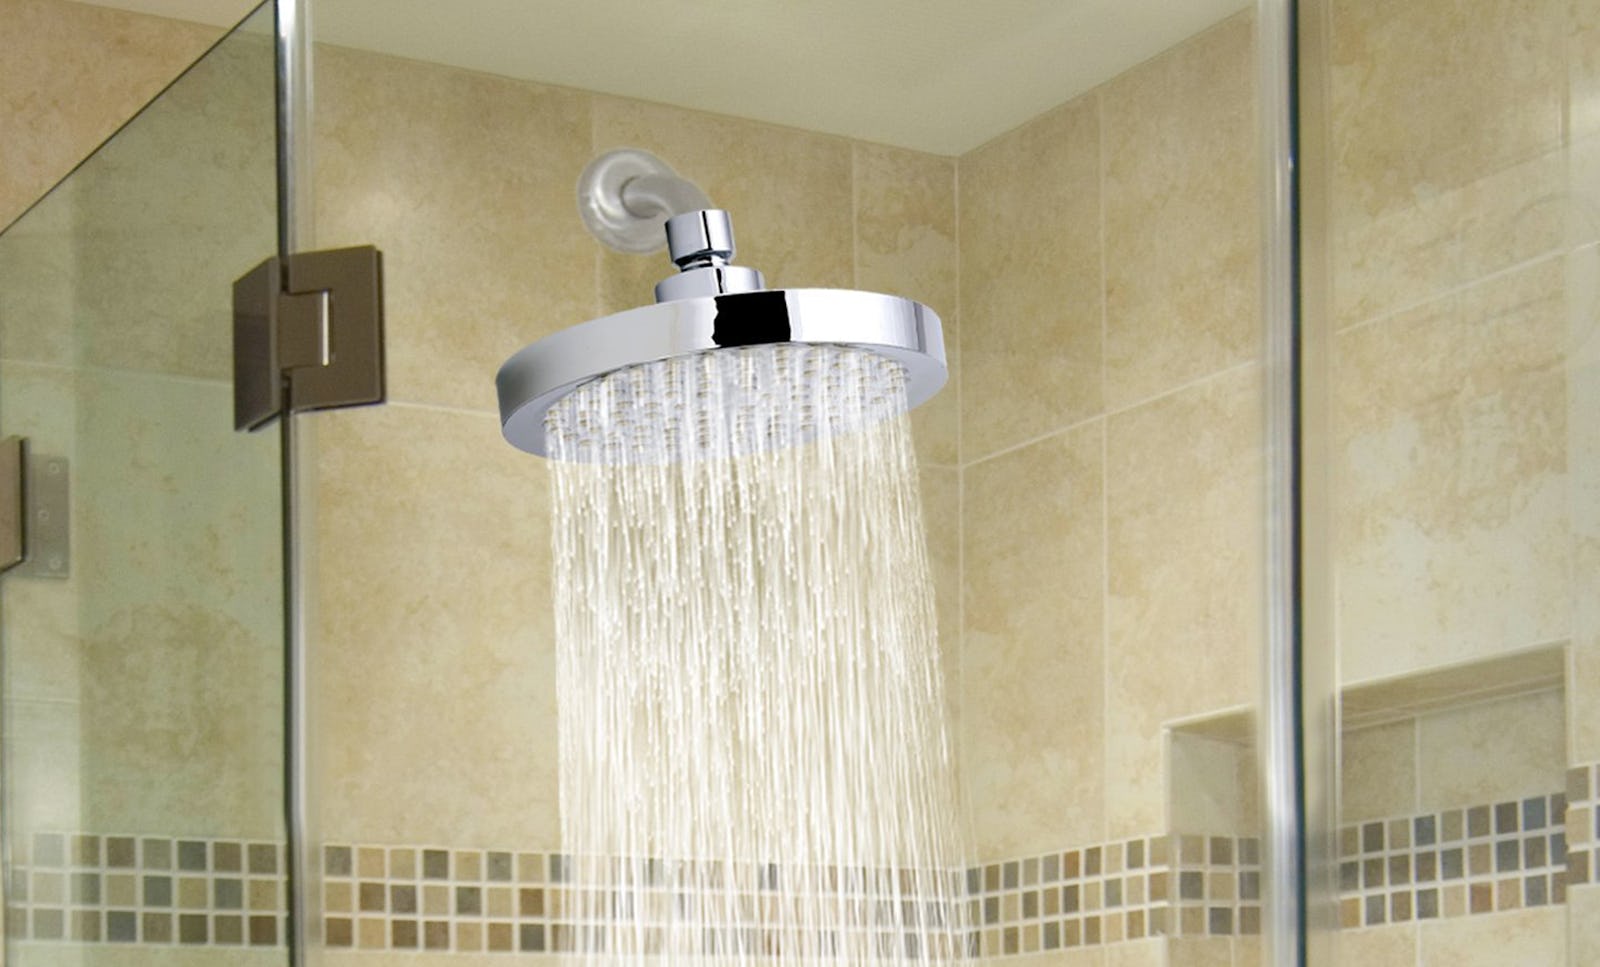 1836db78 46d6 42f0 Adfb F6c492a72056 Best Rated Shower Heads Hero ?w=800&fit=crop&crop=faces&auto=format%2Ccompress&q=50&dpr=2